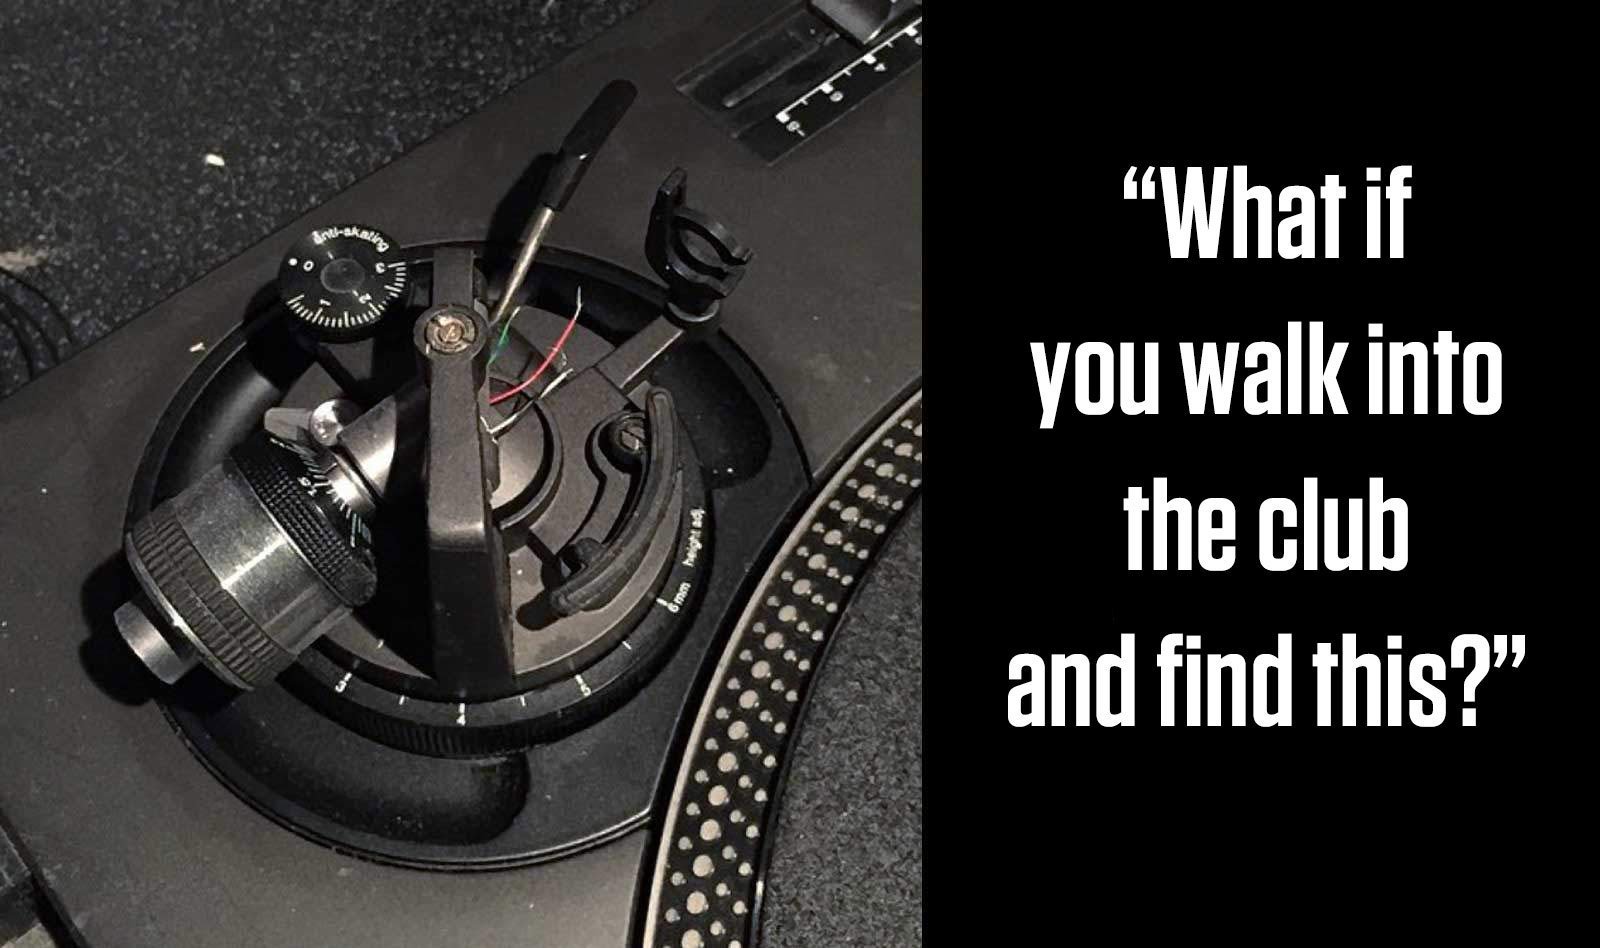 Needle skips to network dips — DJing is all about "what ifs" 6